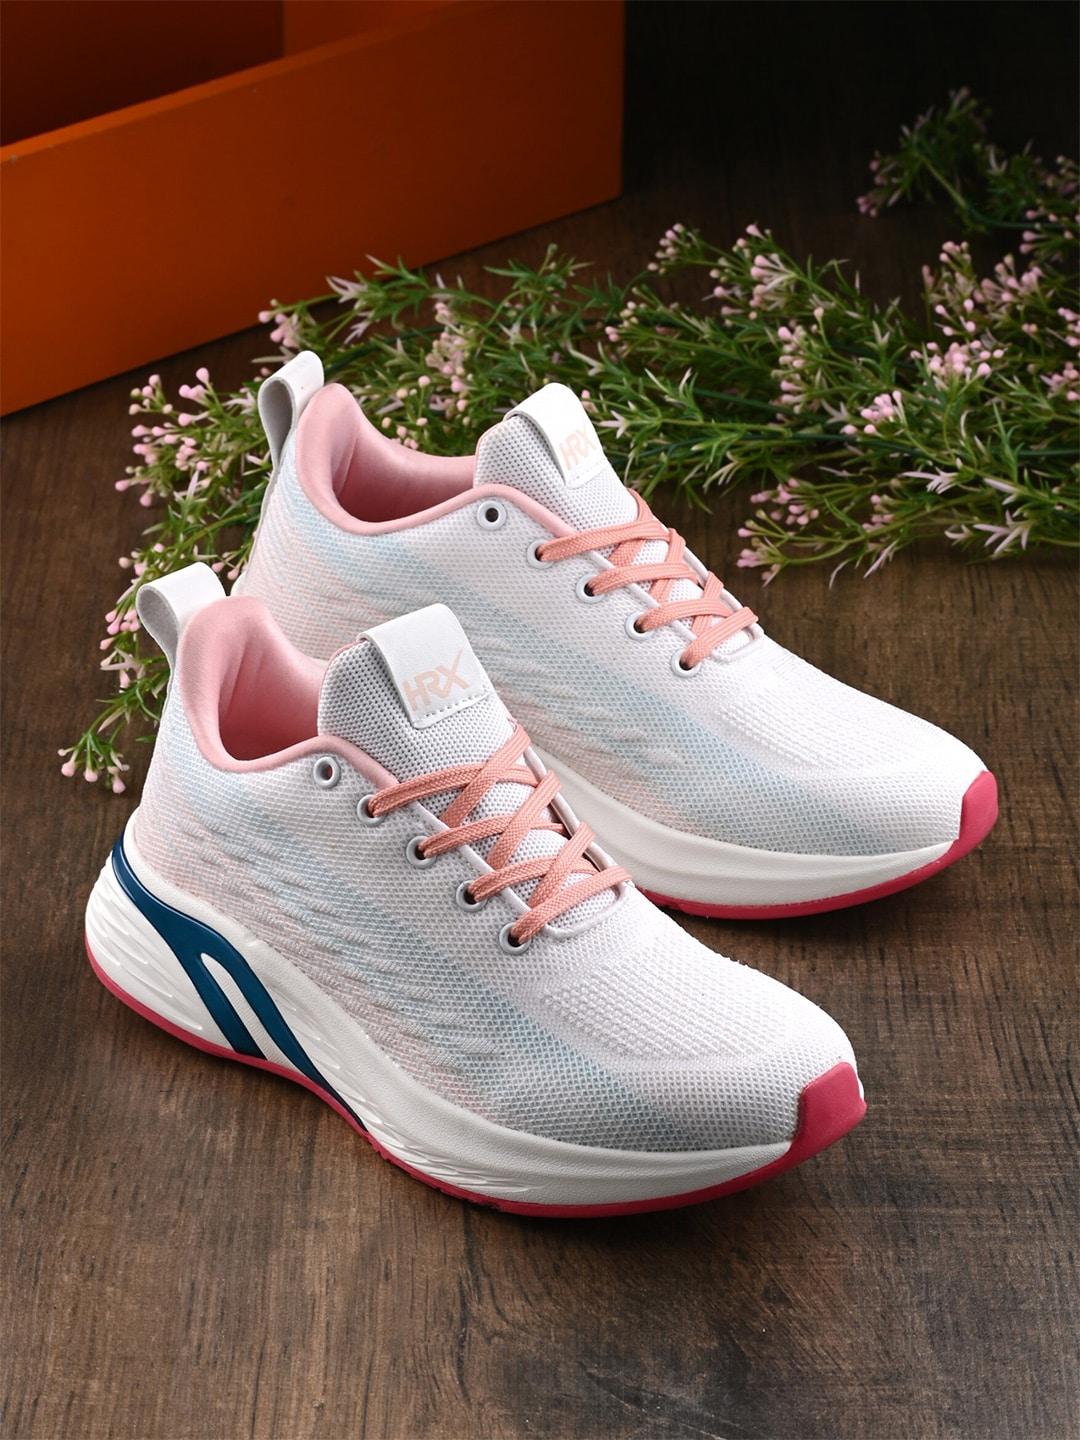 hrx-by-hrithik-roshan-women-white-&-pink-lace-up-running-shoes